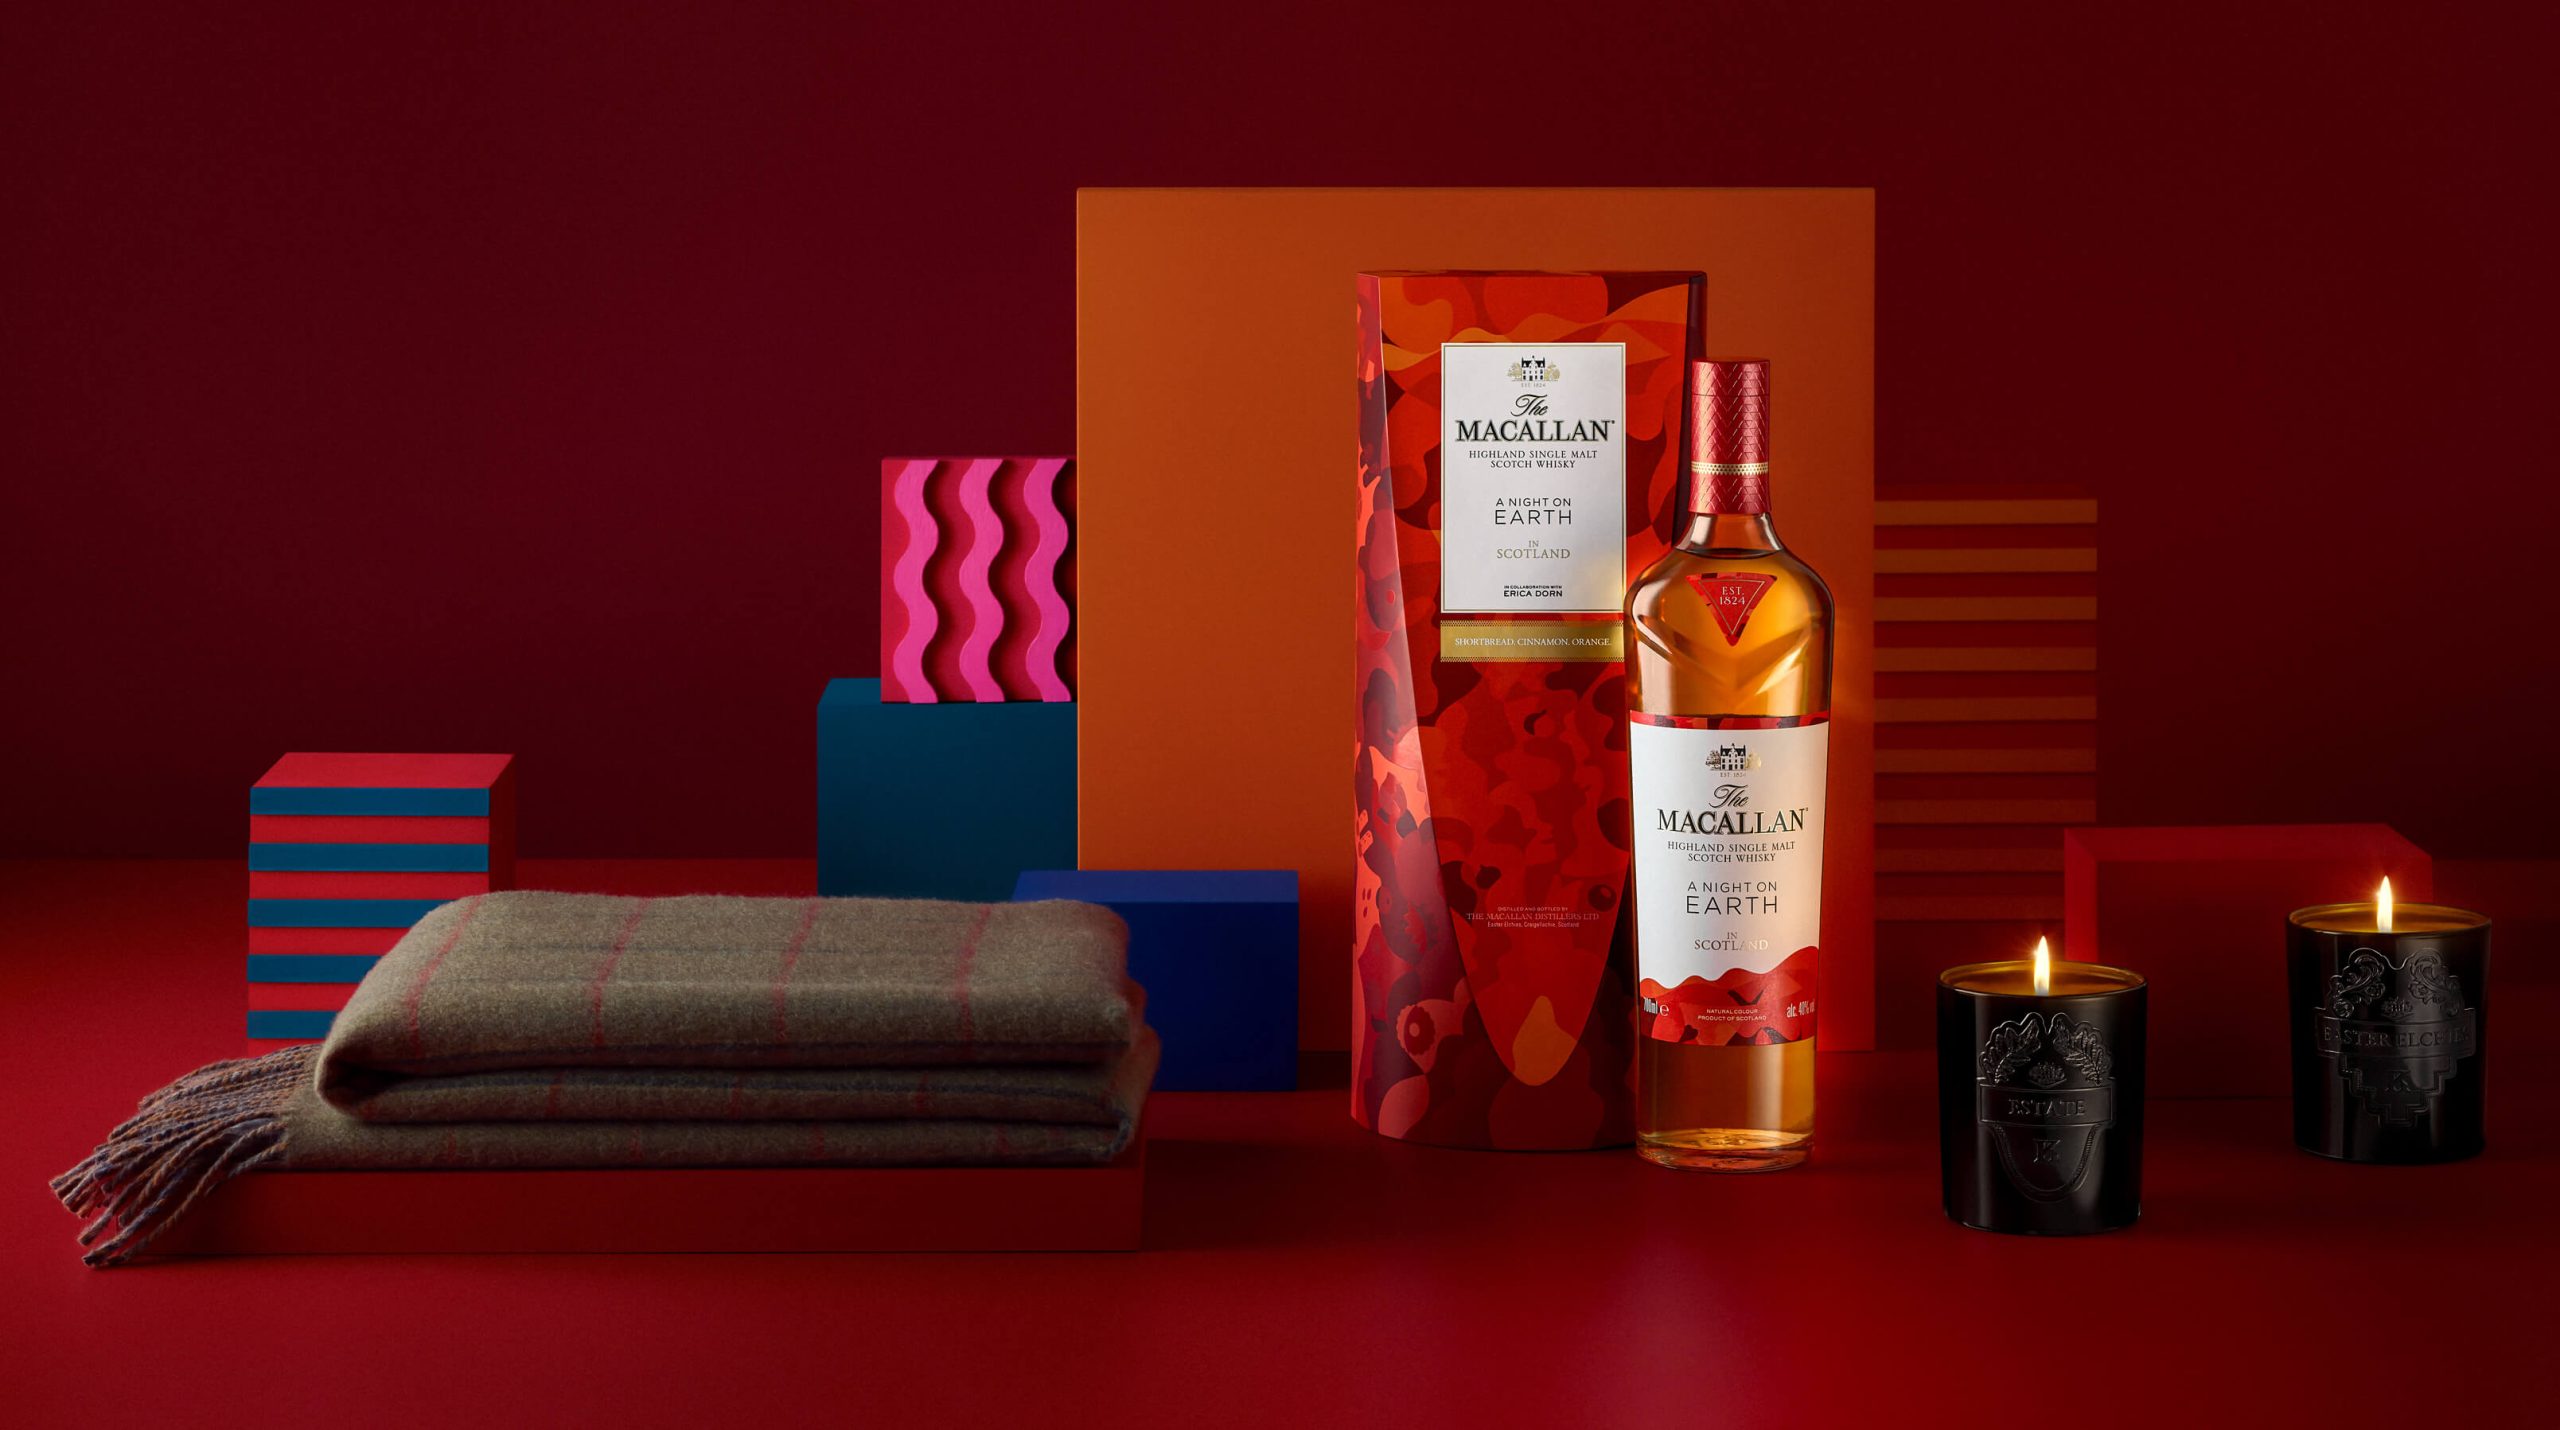 The Macallan Whisky Accessories